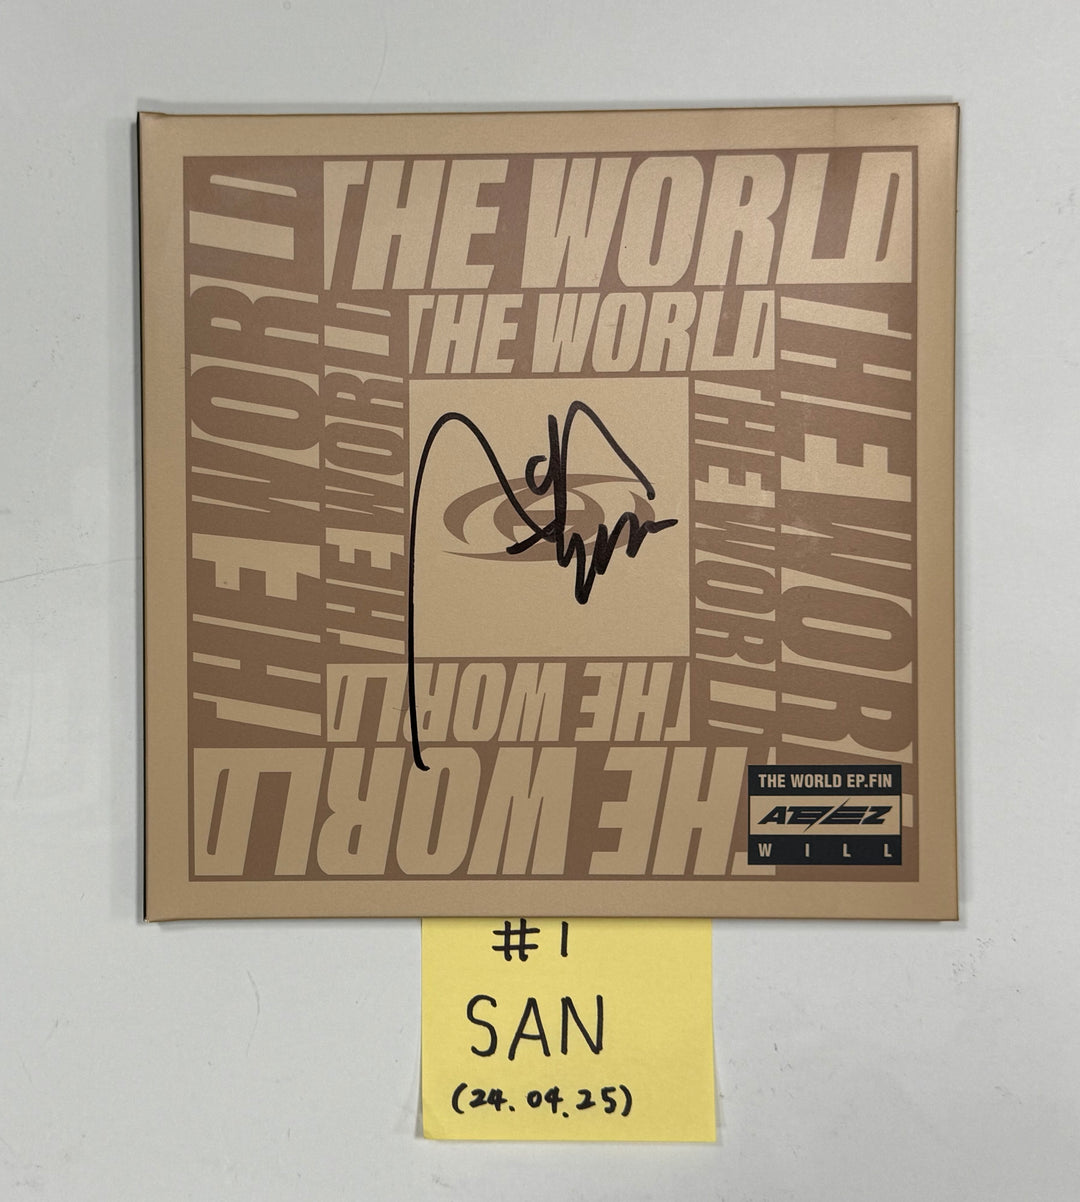 San (Of Ateez) "The World Ep.Fin : Will" - Hand Autographed(Signed) Album [24.4.25]